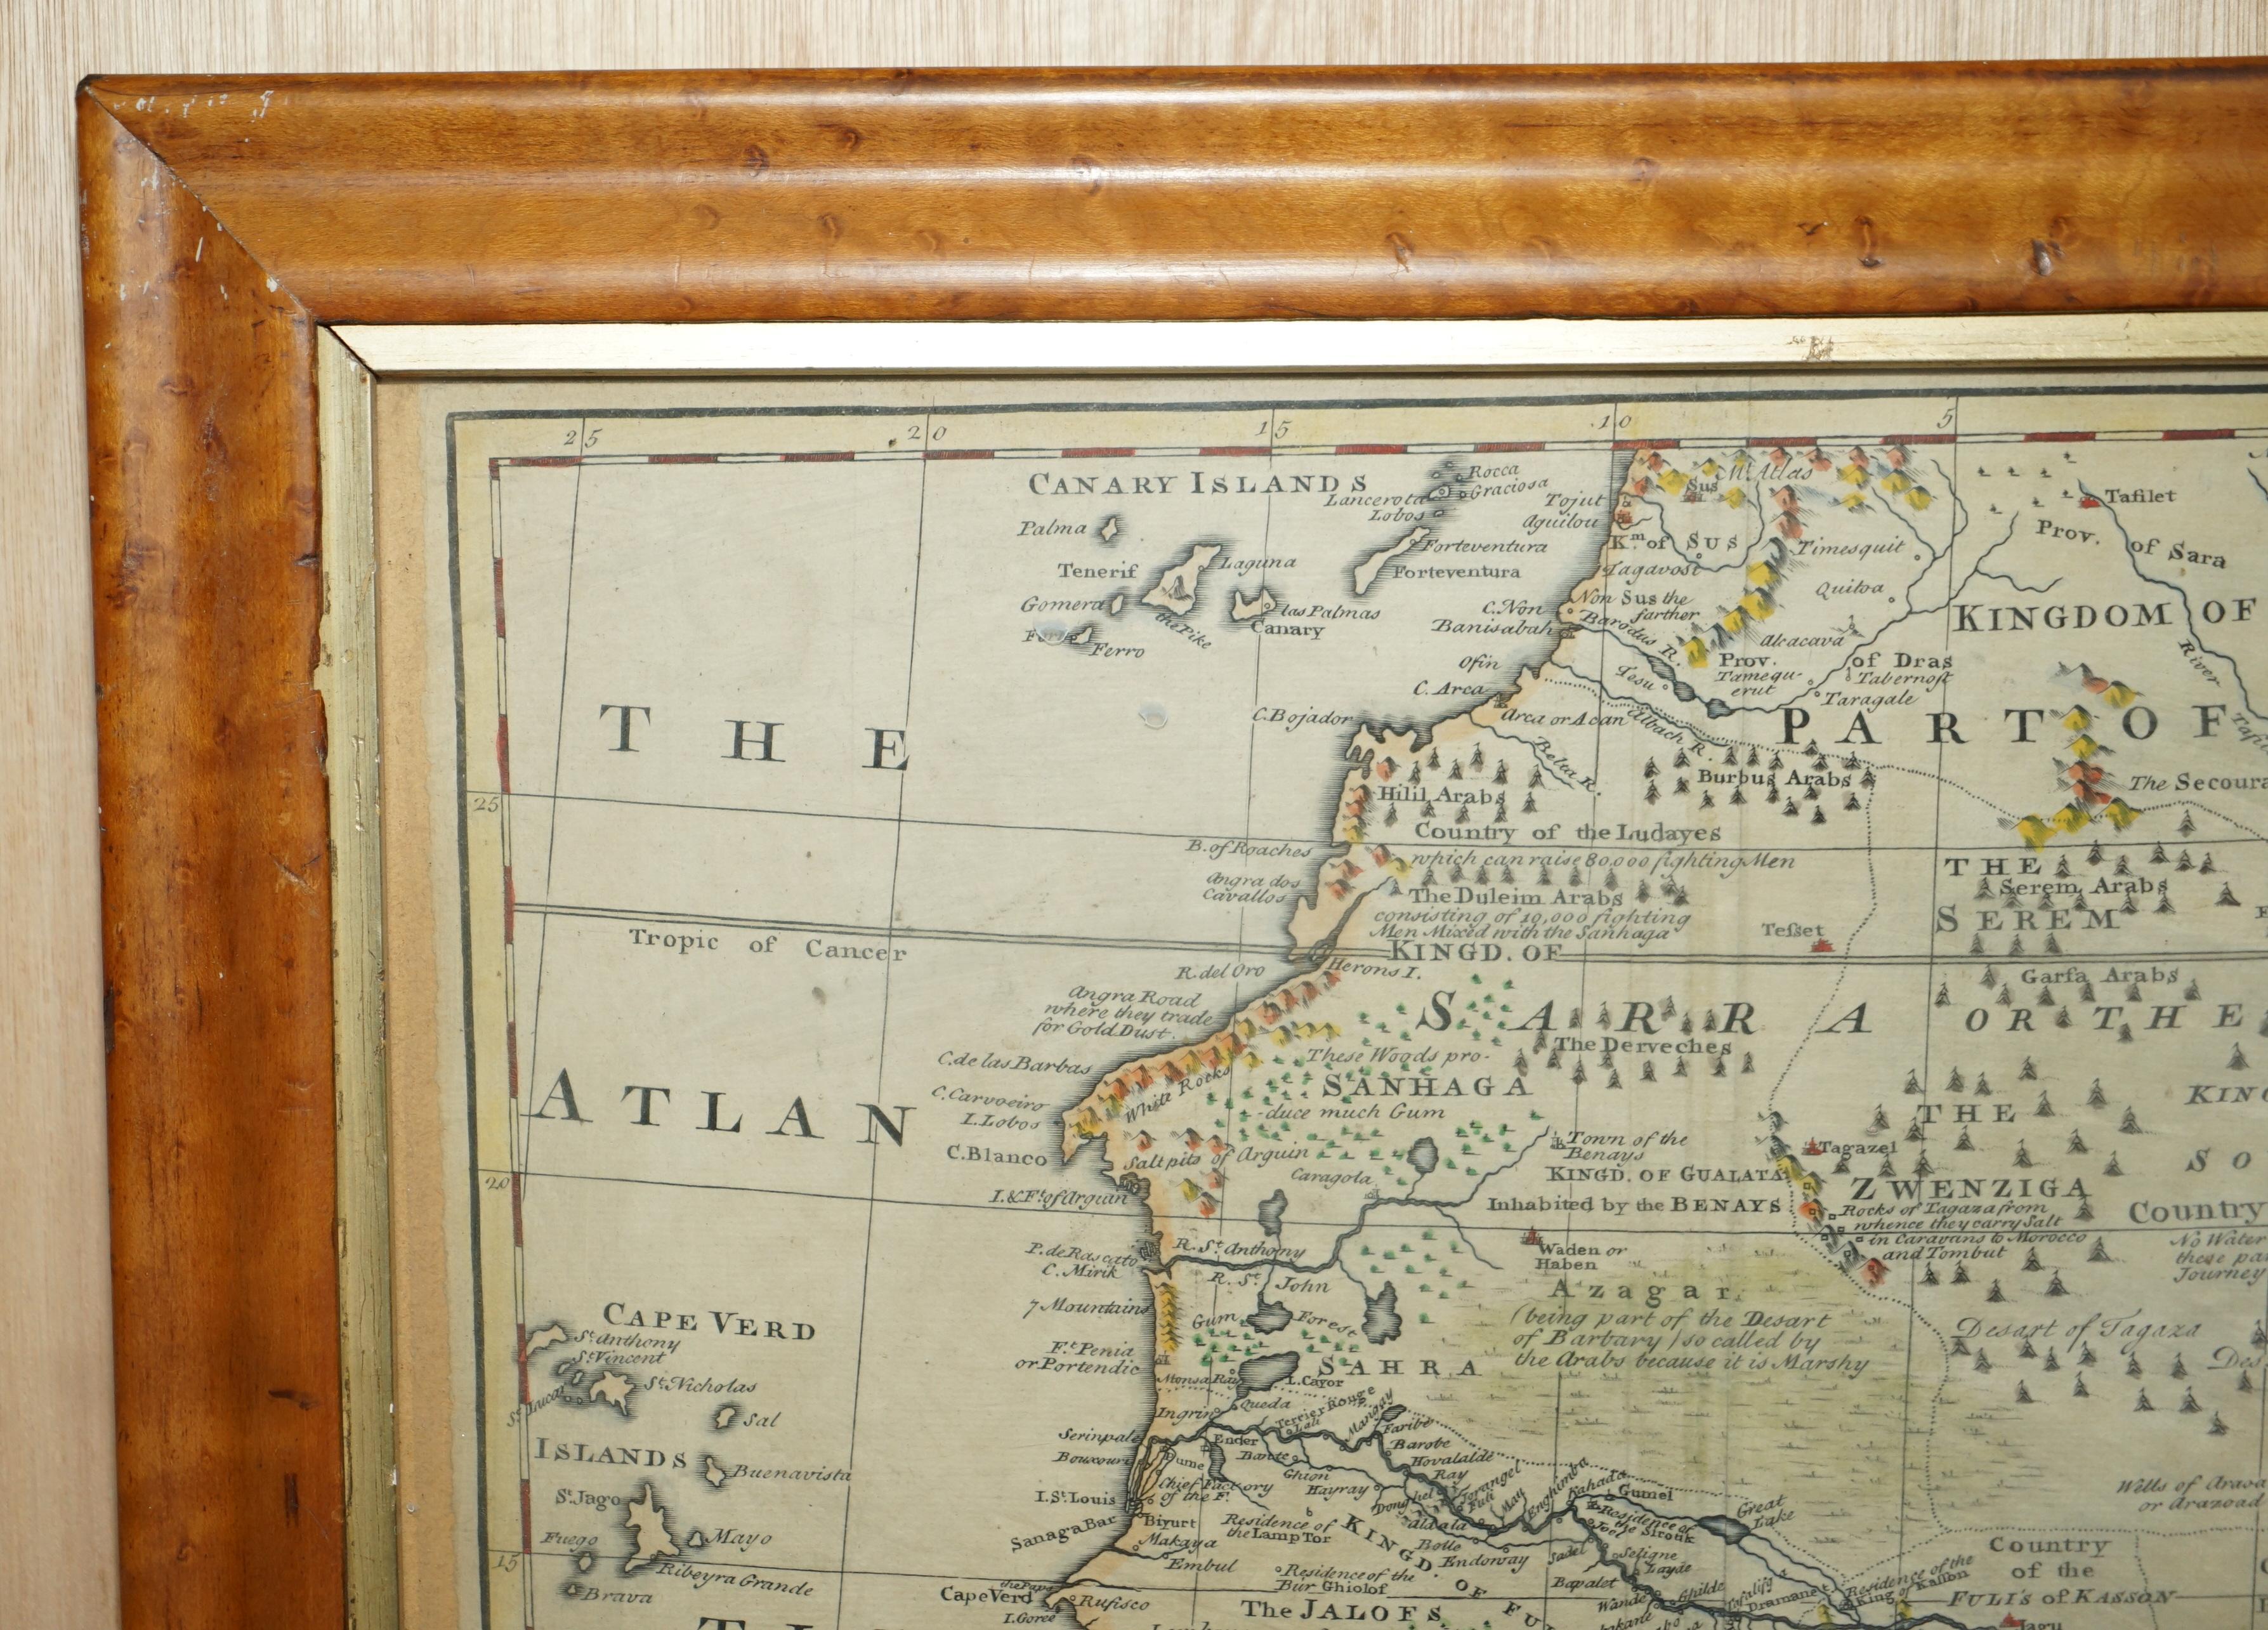 Other 1747 British Map Showing the Kingdom of Judah on the West Coast of Africa